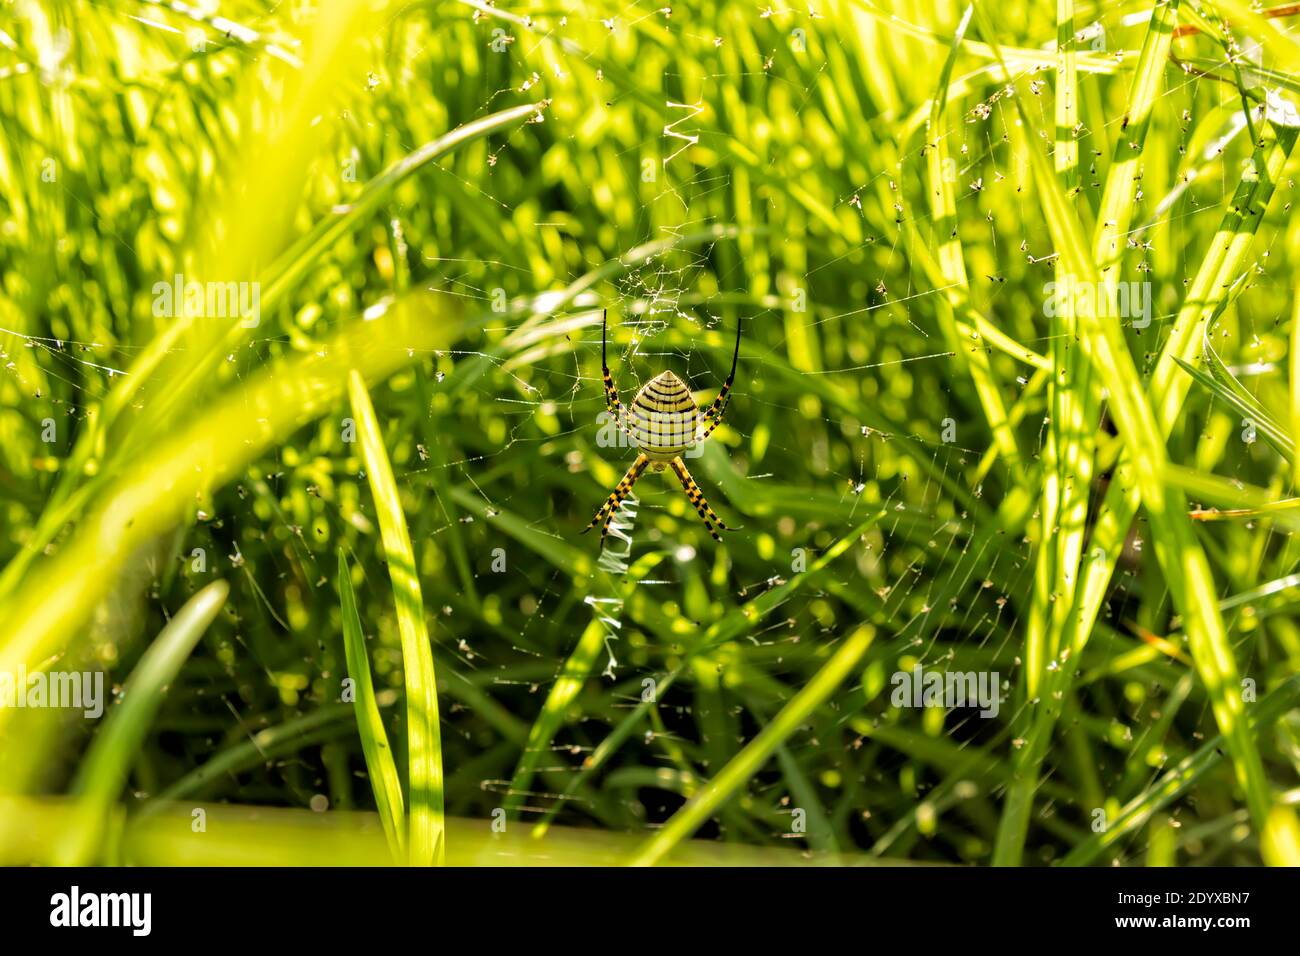 Banded garden spider weaving a web in the green grass in the sun close-up Stock Photo